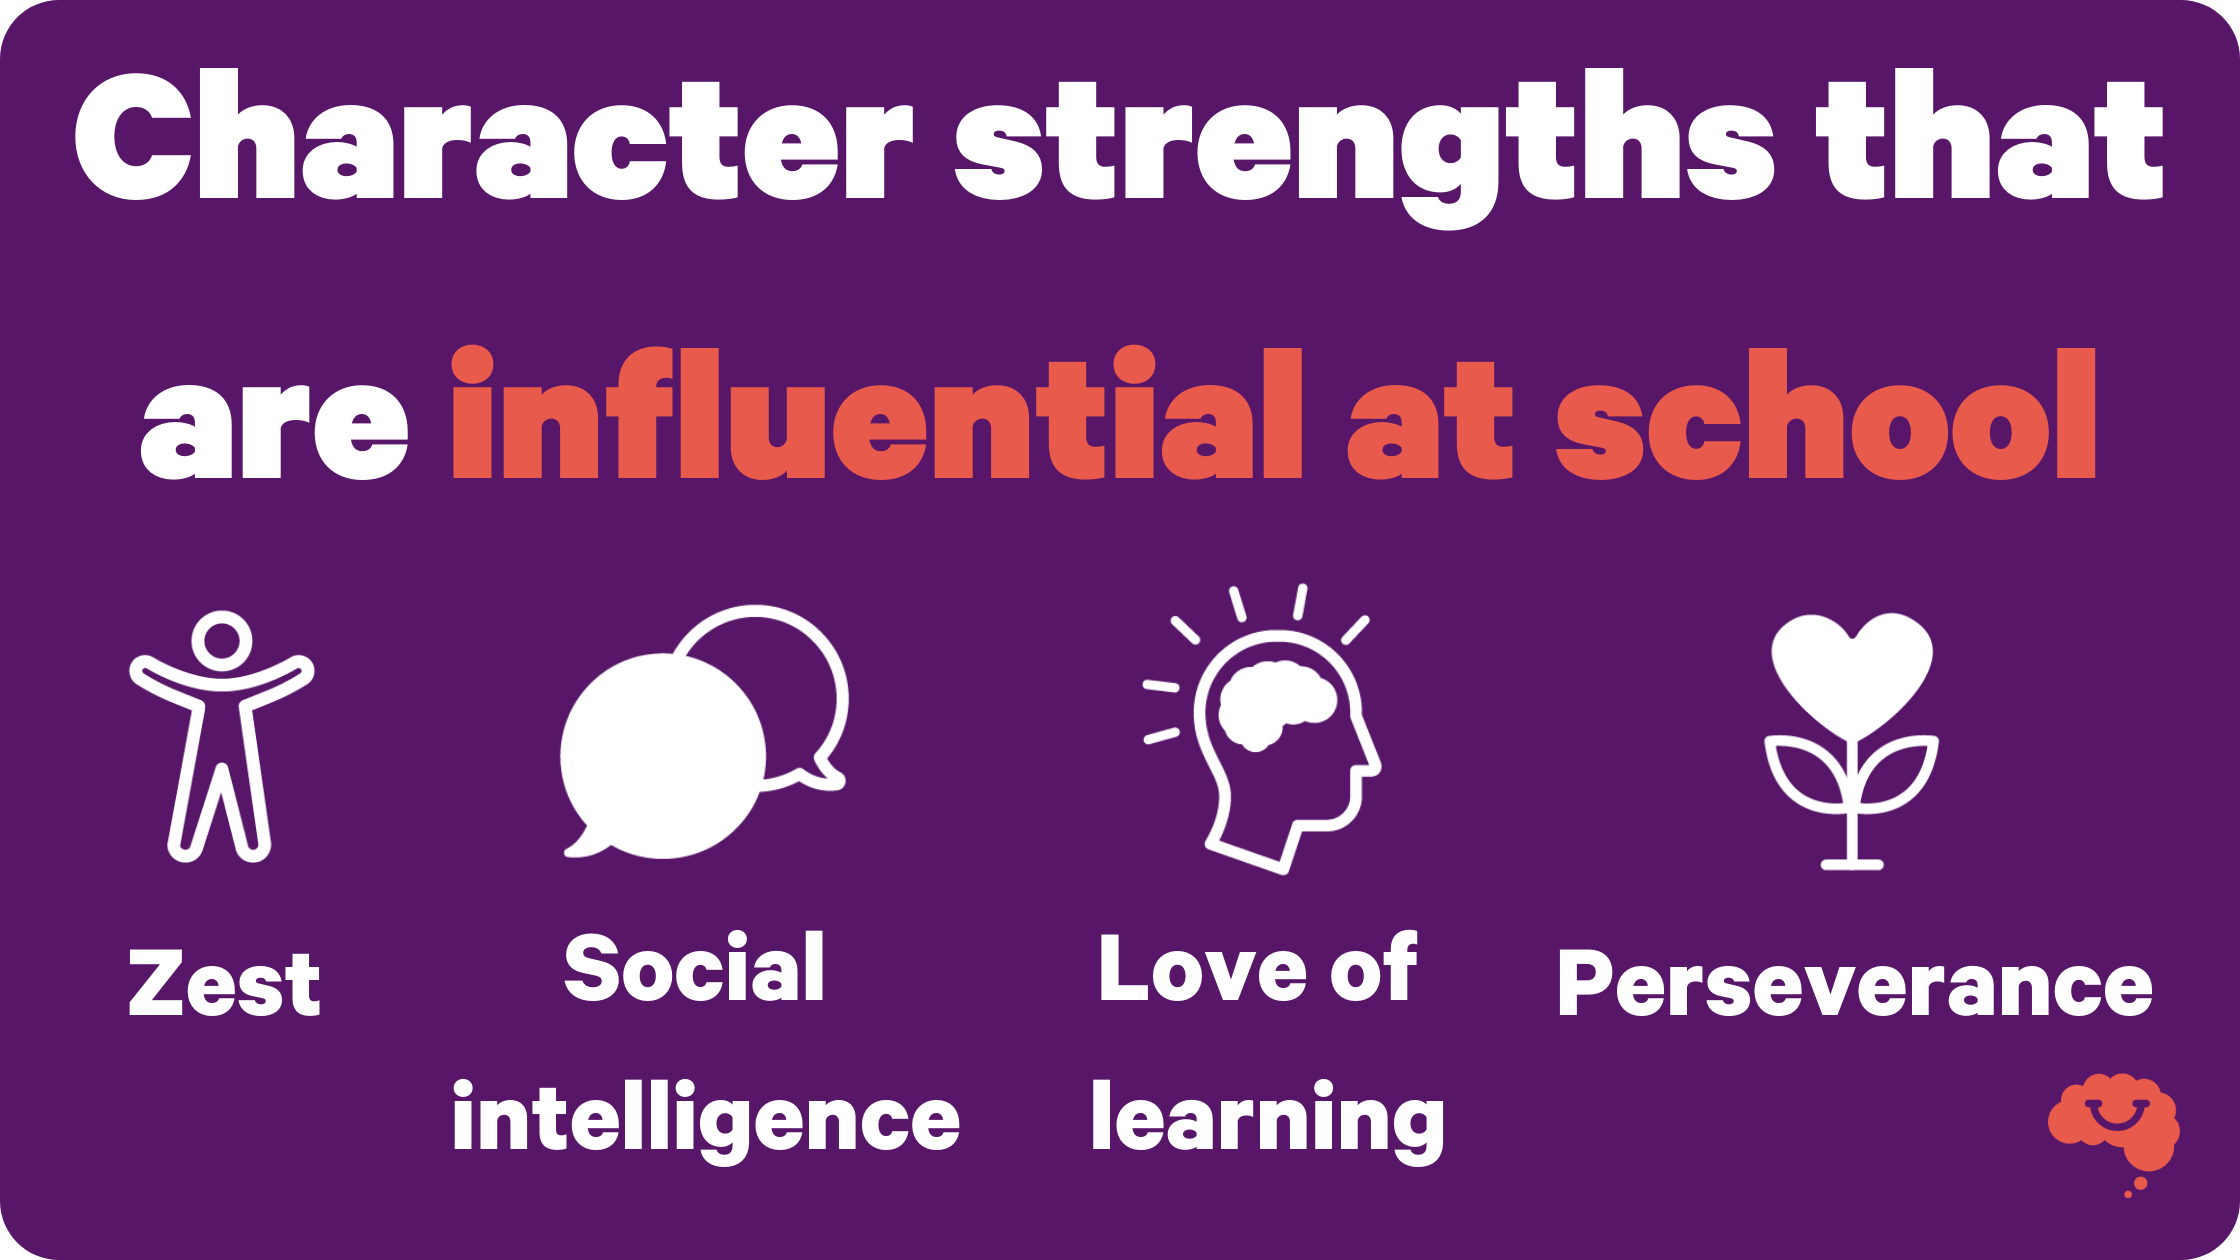 Childrens character strengths